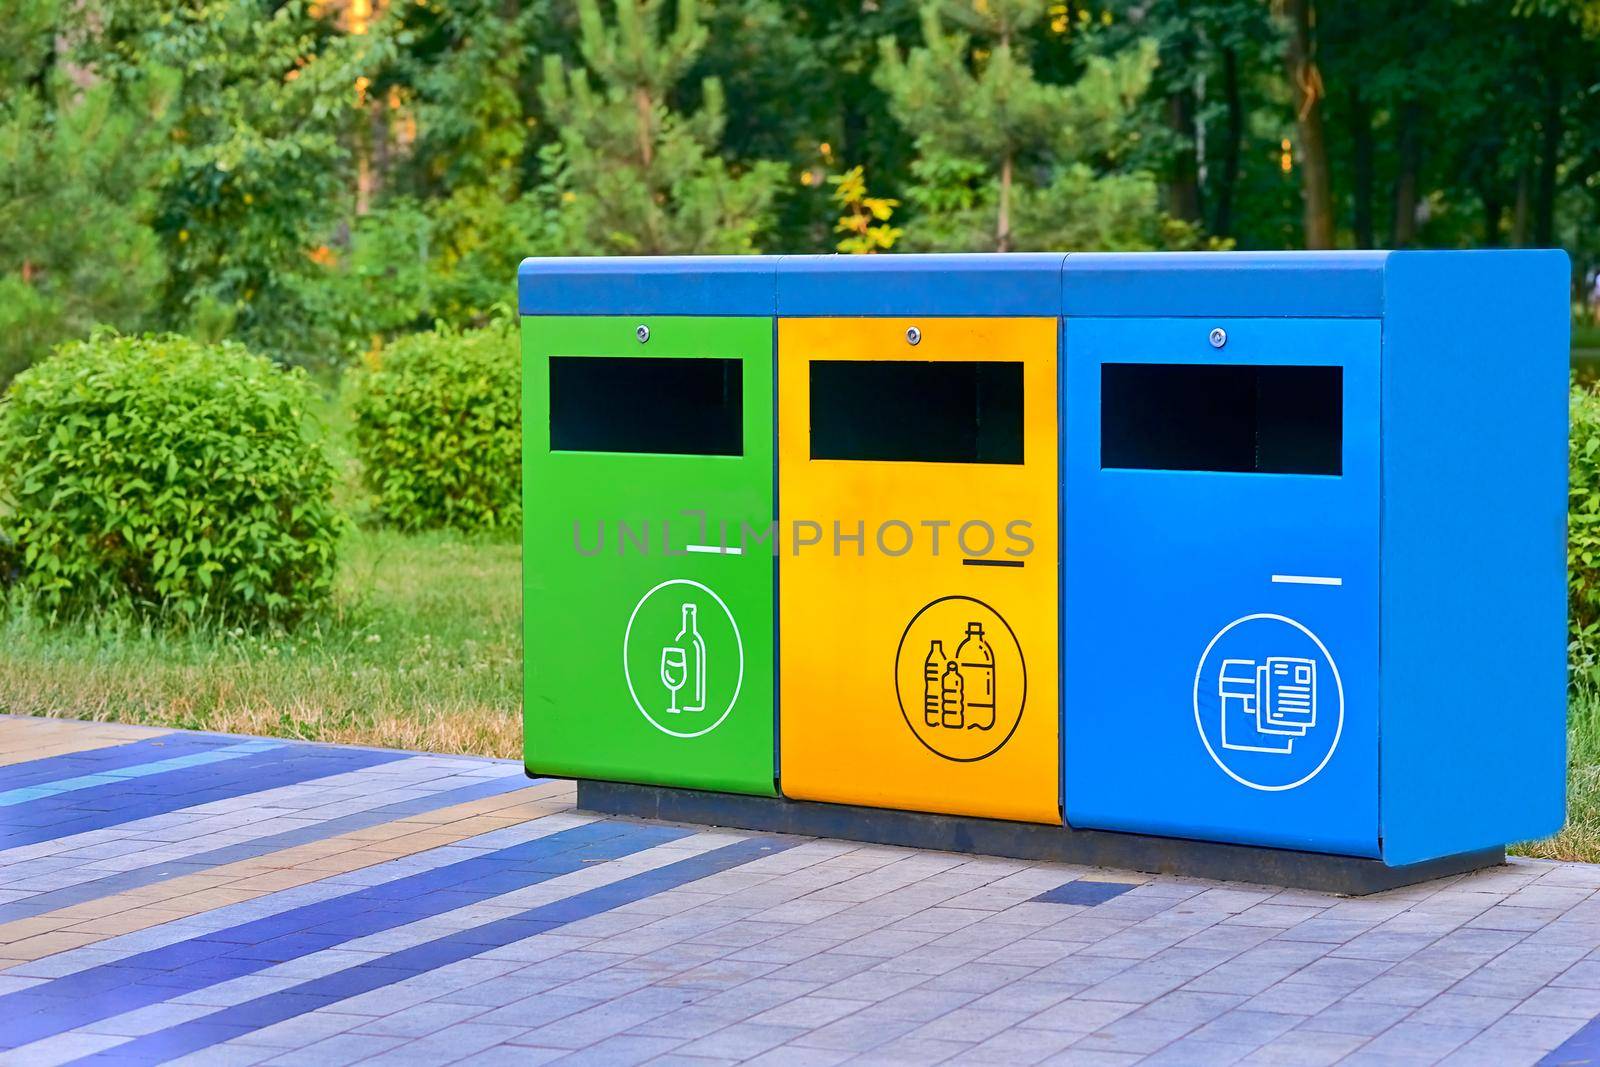 the branch of biology that deals with the relations of organisms to one another and to their physical surroundings. Ecology. Separate waste containers for plastic, paper and glass in a summer park.